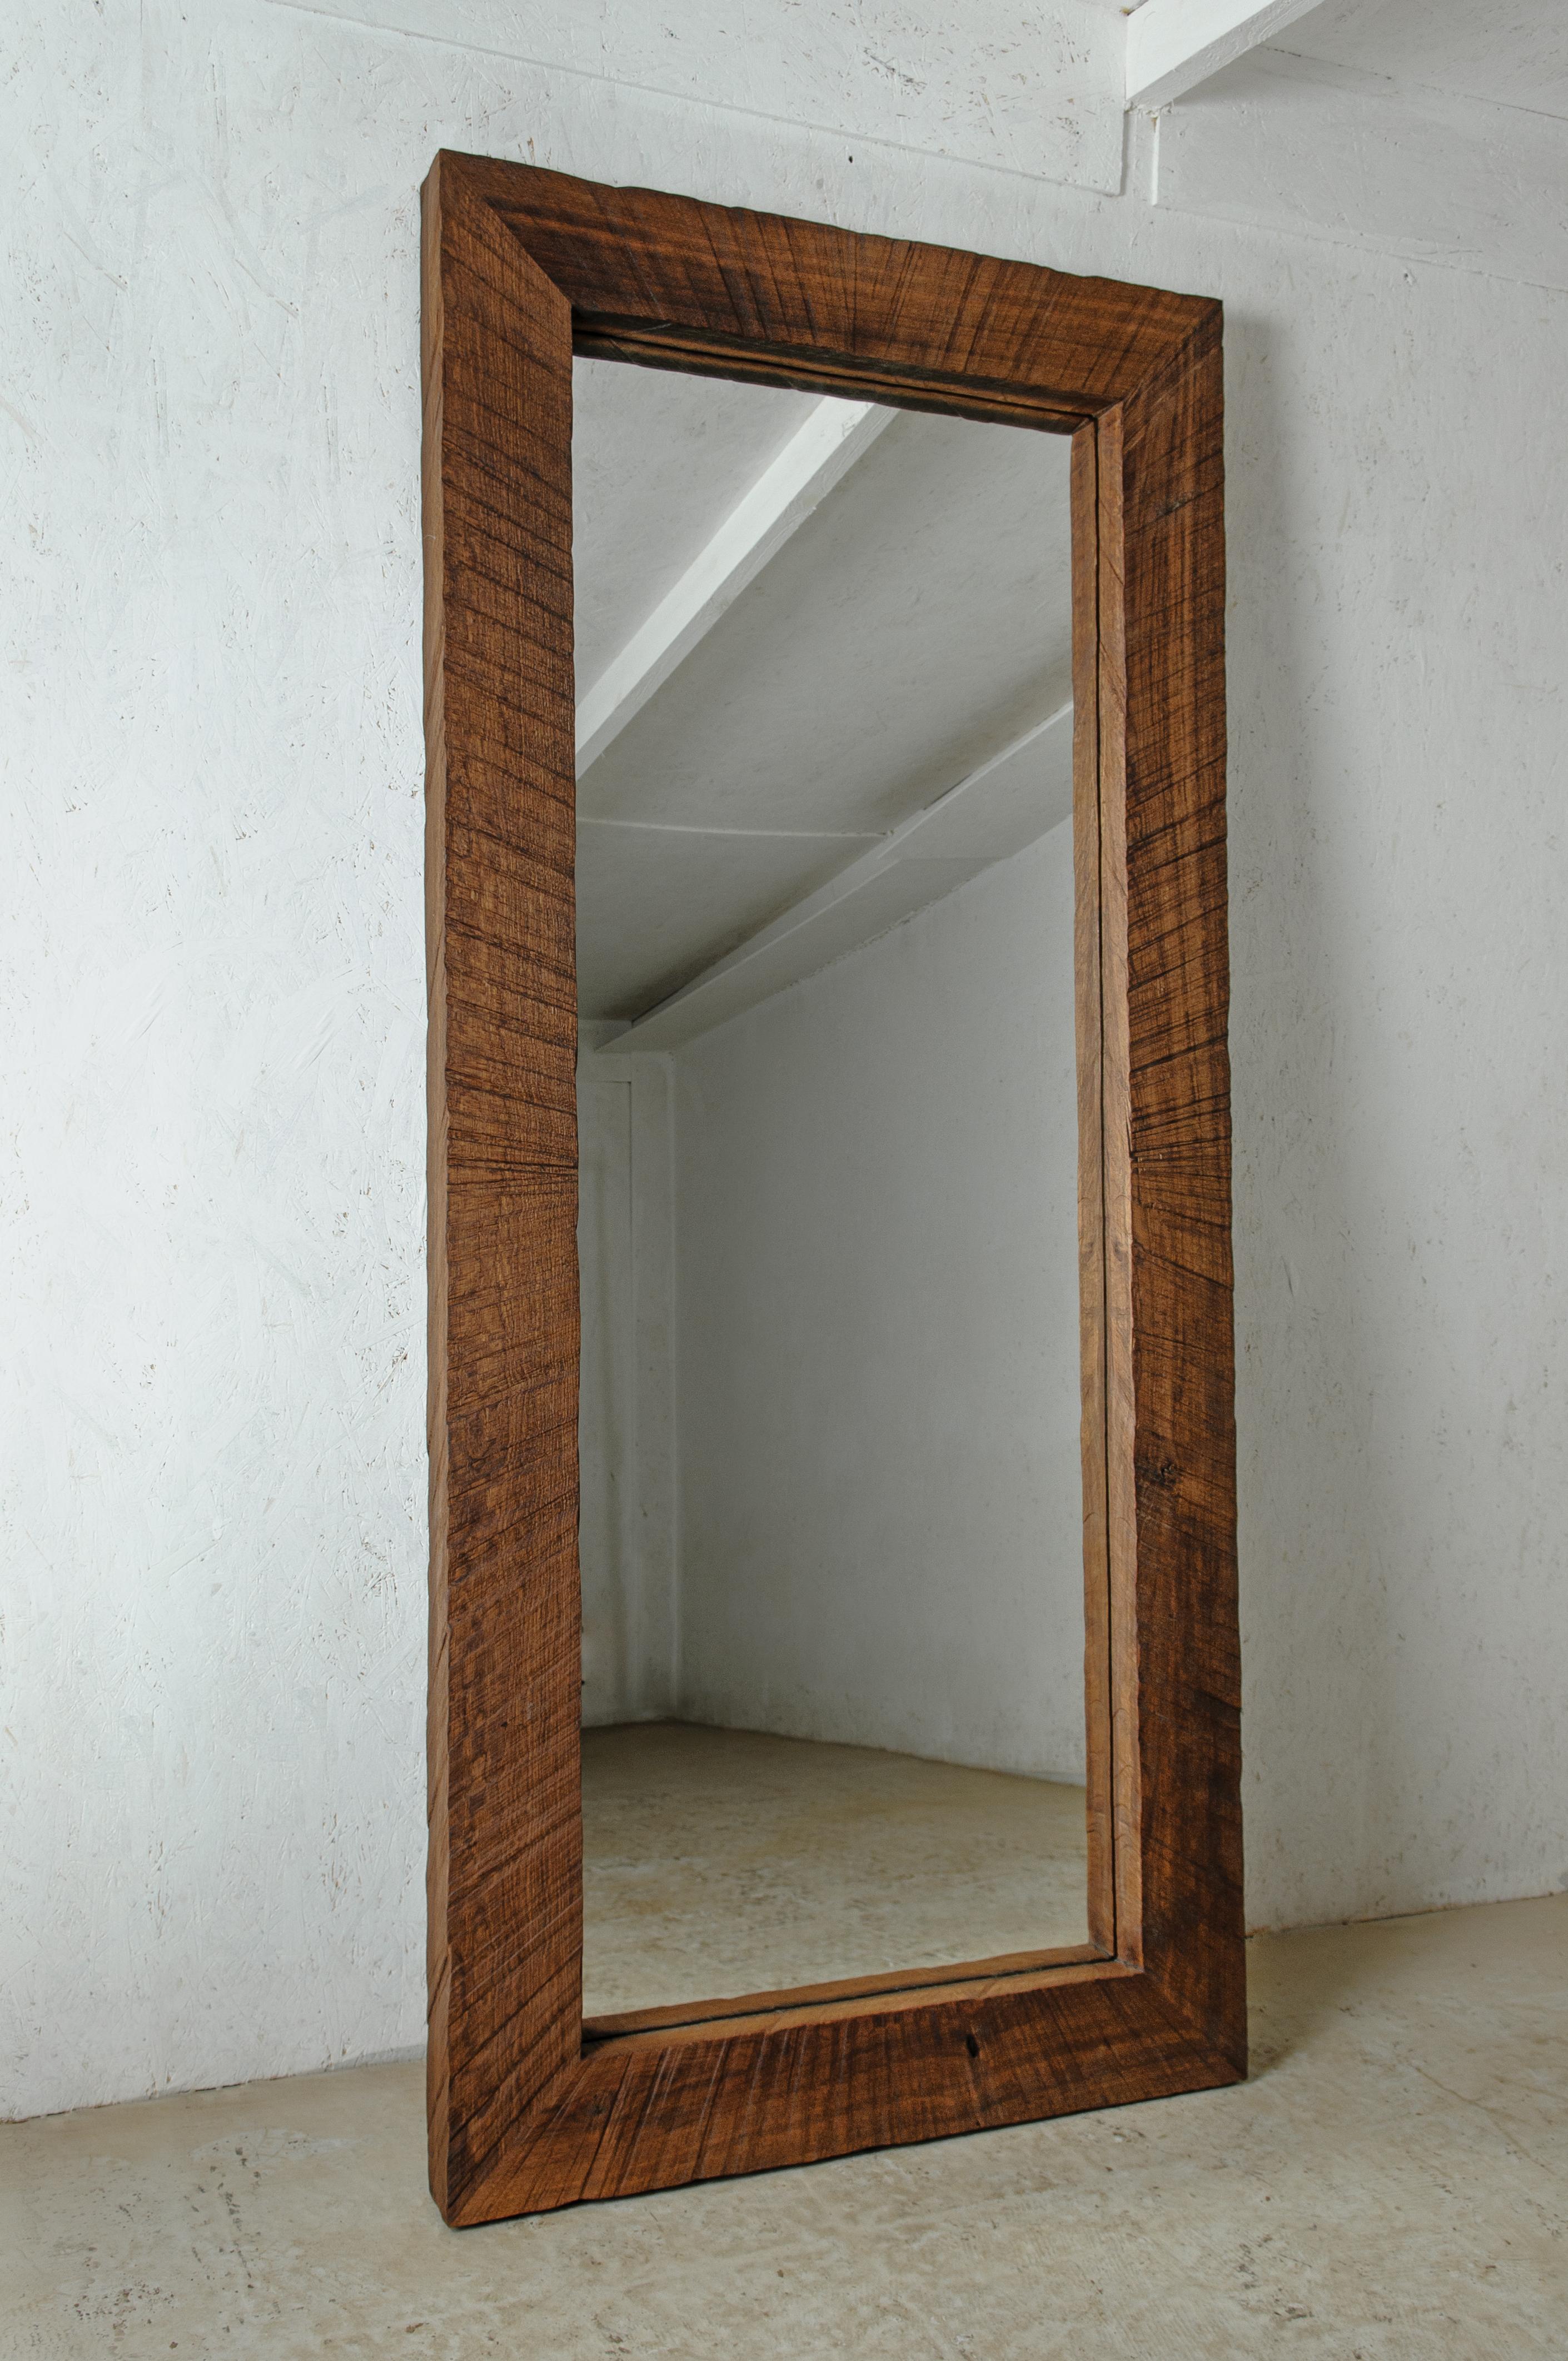 Full length mirror of solid oak (+ linseed oil)
Measures: 189 x 98 x 10 cm

SÓHA design studio conceives and produces furniture design and decorative objects in solid oak in an authentic style. Inspiration to create all these items comes from the